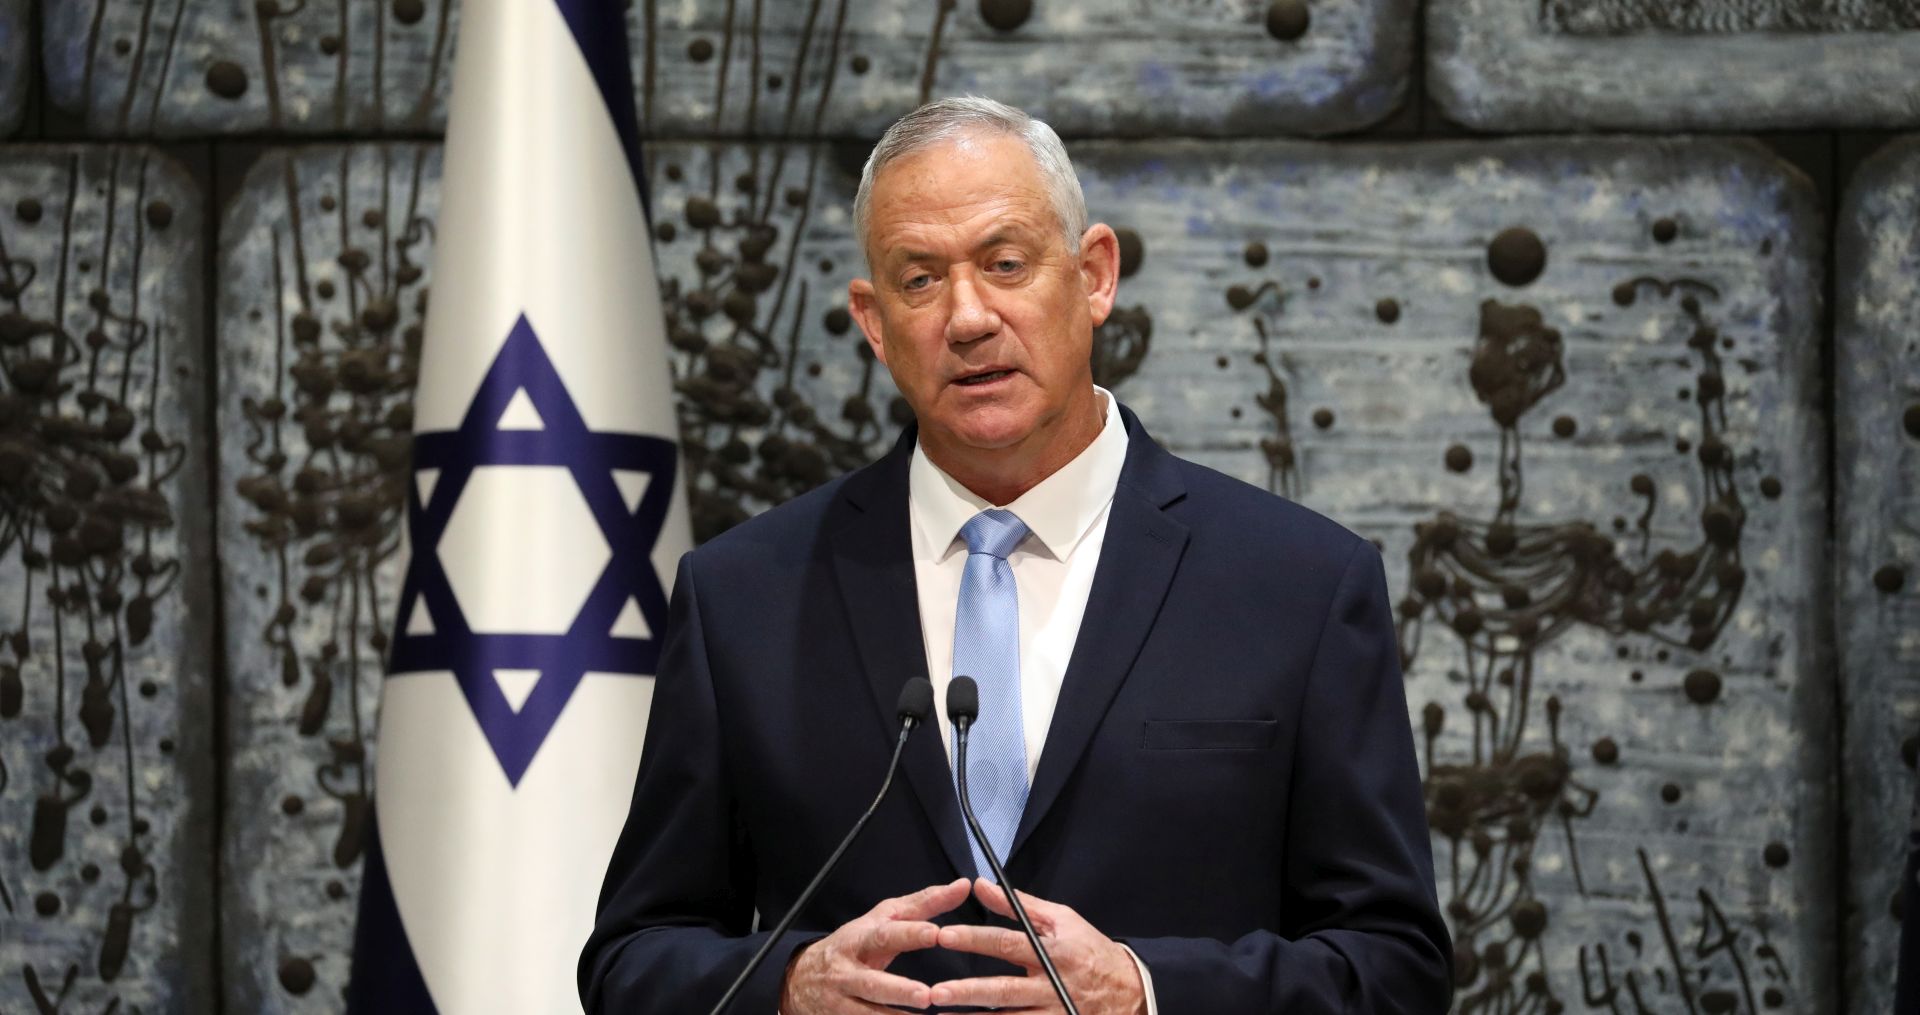 epa07943658 Benny Gantz, leader of the Blue and White party, speaks during a press statement after a letter of appointment for entrusted with forming the next government was handed to Gantz at the President's residence in Jerusalem, Israel, 23 October 2019. Israeli Prime Minister Netanyahu failed to form a coalition within the 28 days given to him by the President following the 17 September election. Benny Gantz will have his 28 days to form a coalition.  EPA/ABIR SULTAN